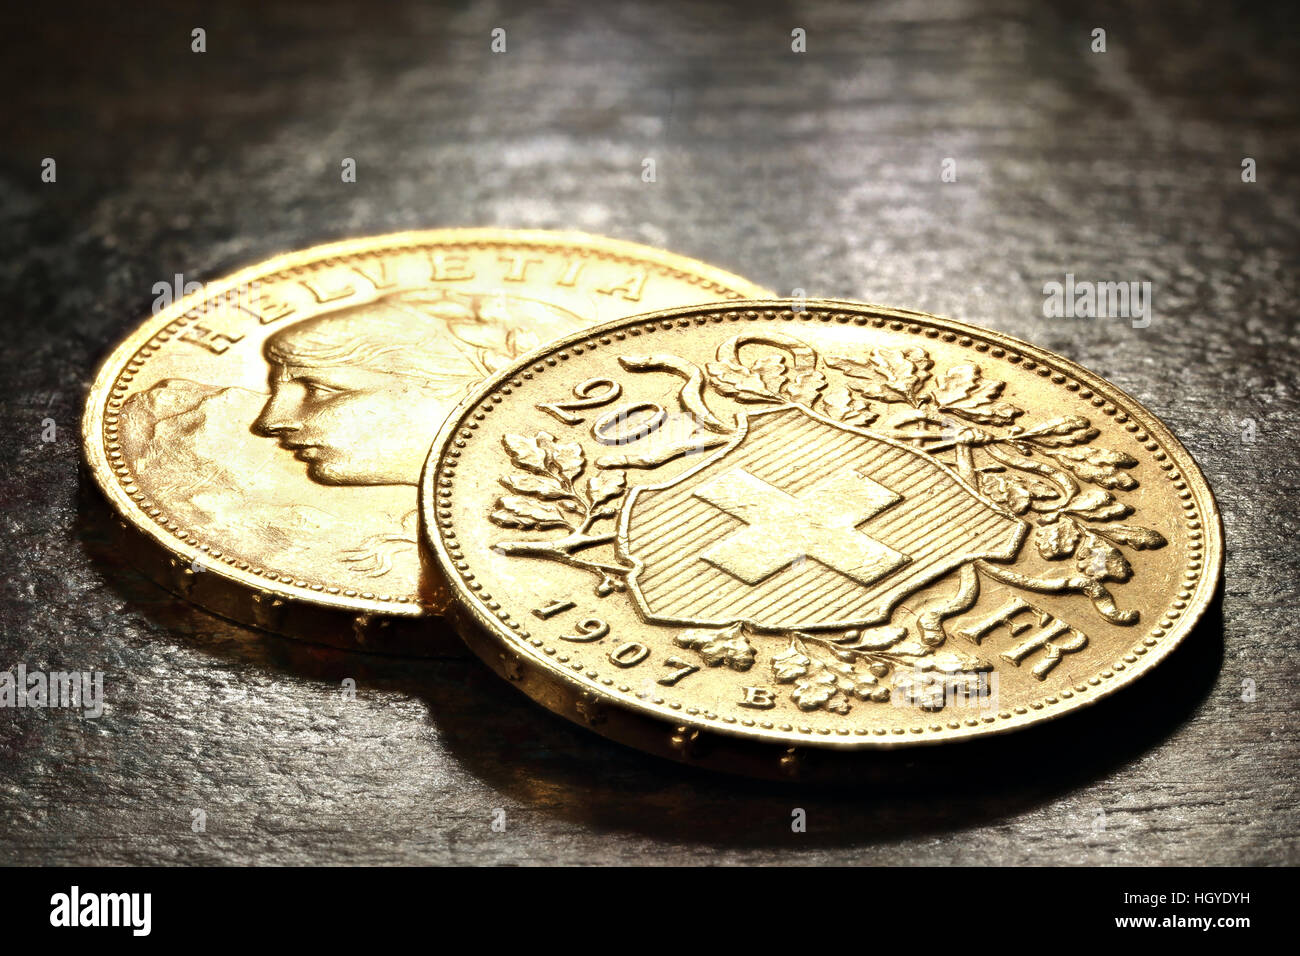 Swiss Vreneli gold coins on rustic wooden background Stock Photo